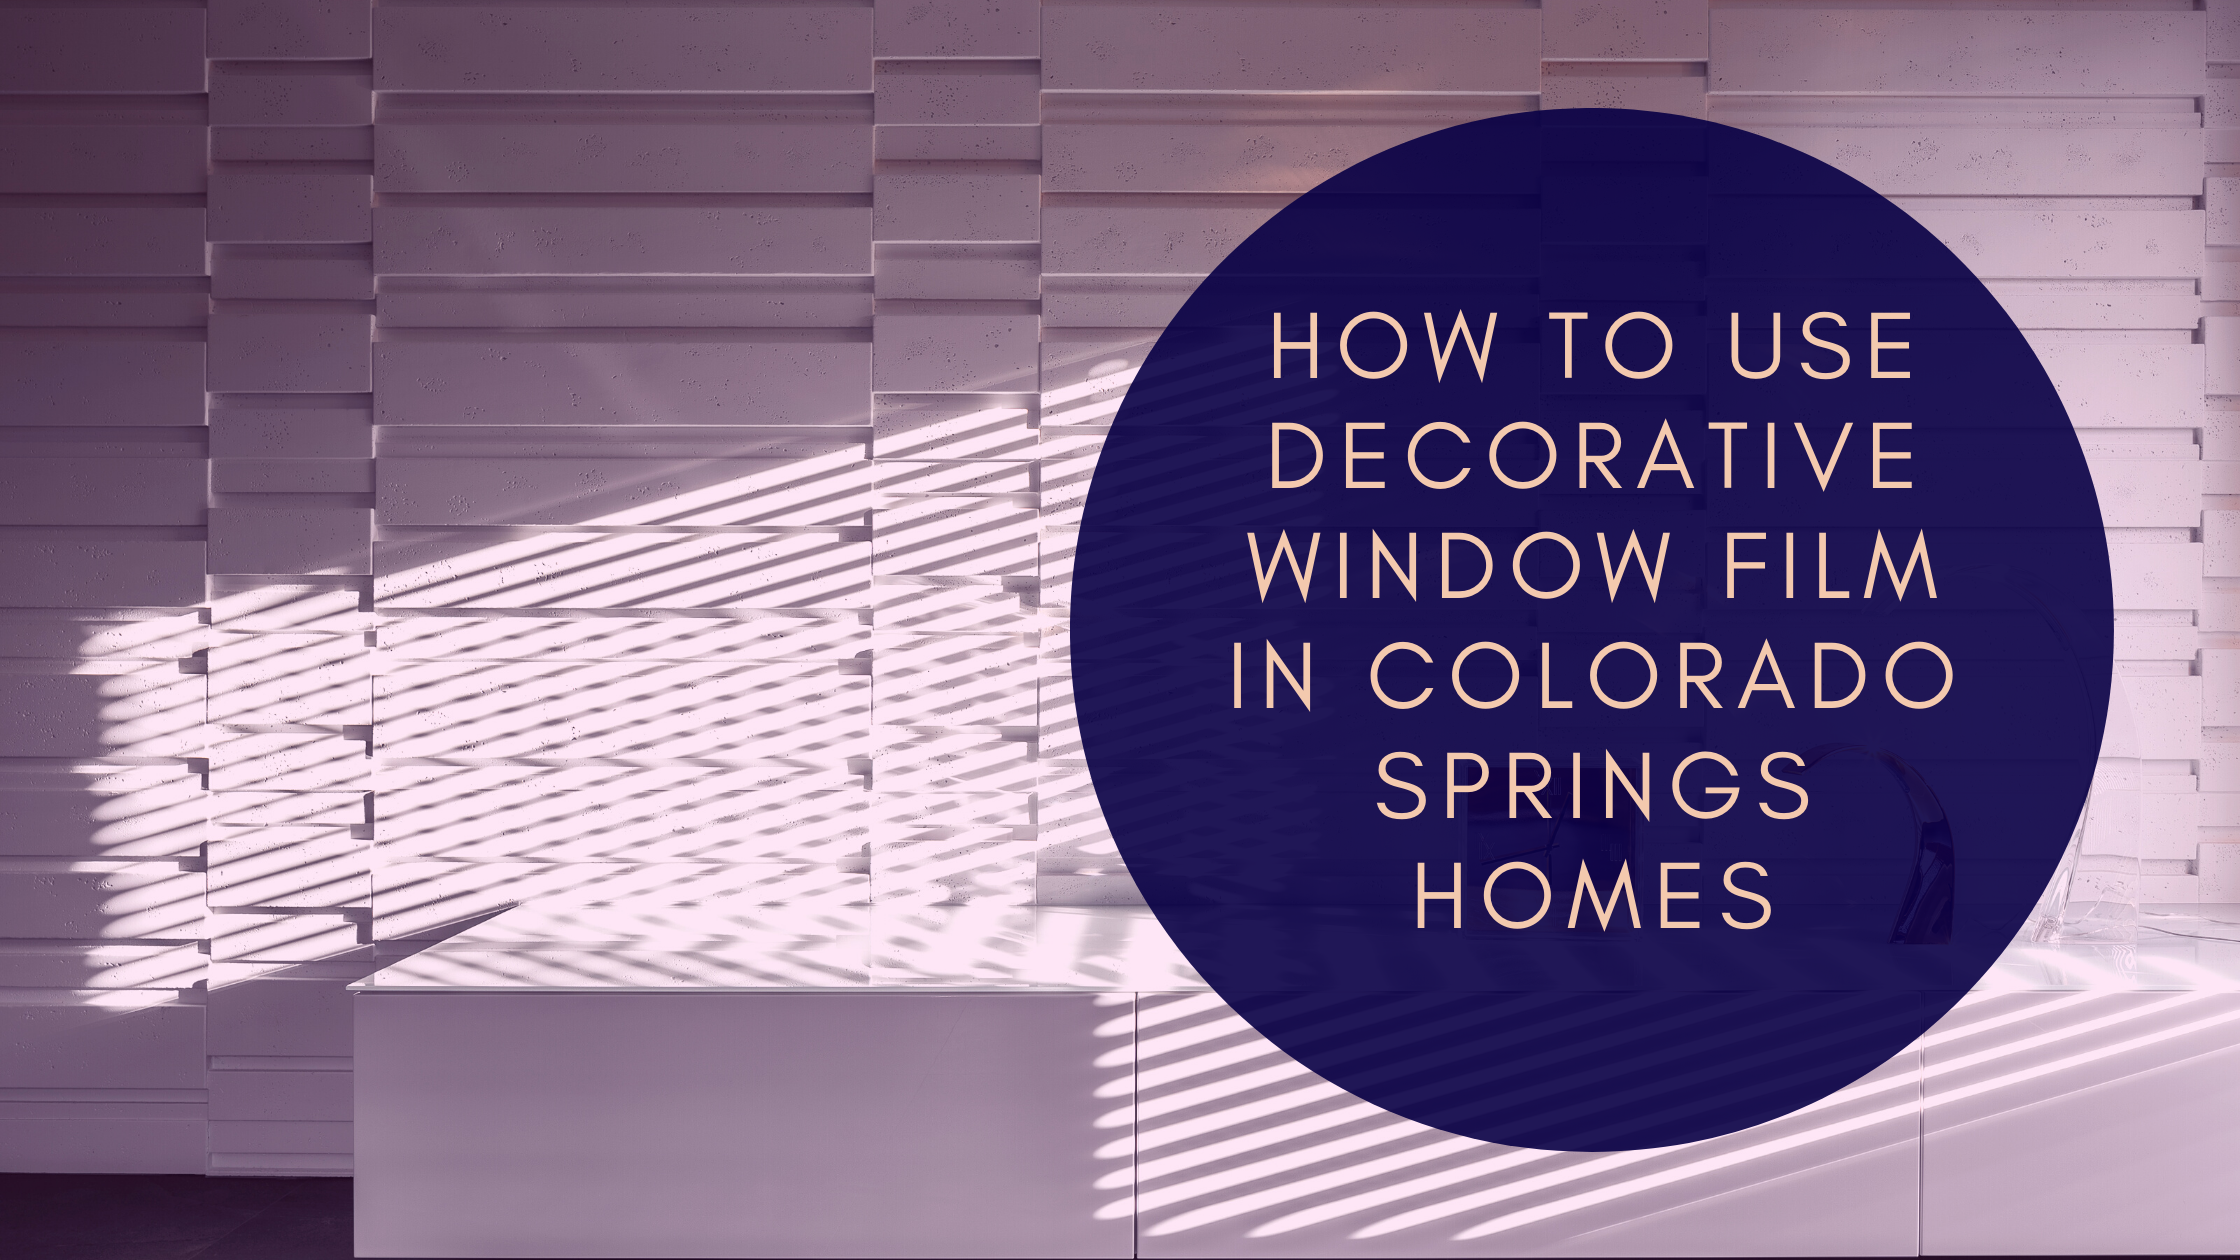 How to Use Decorative Window Film In Colorado Springs Homes